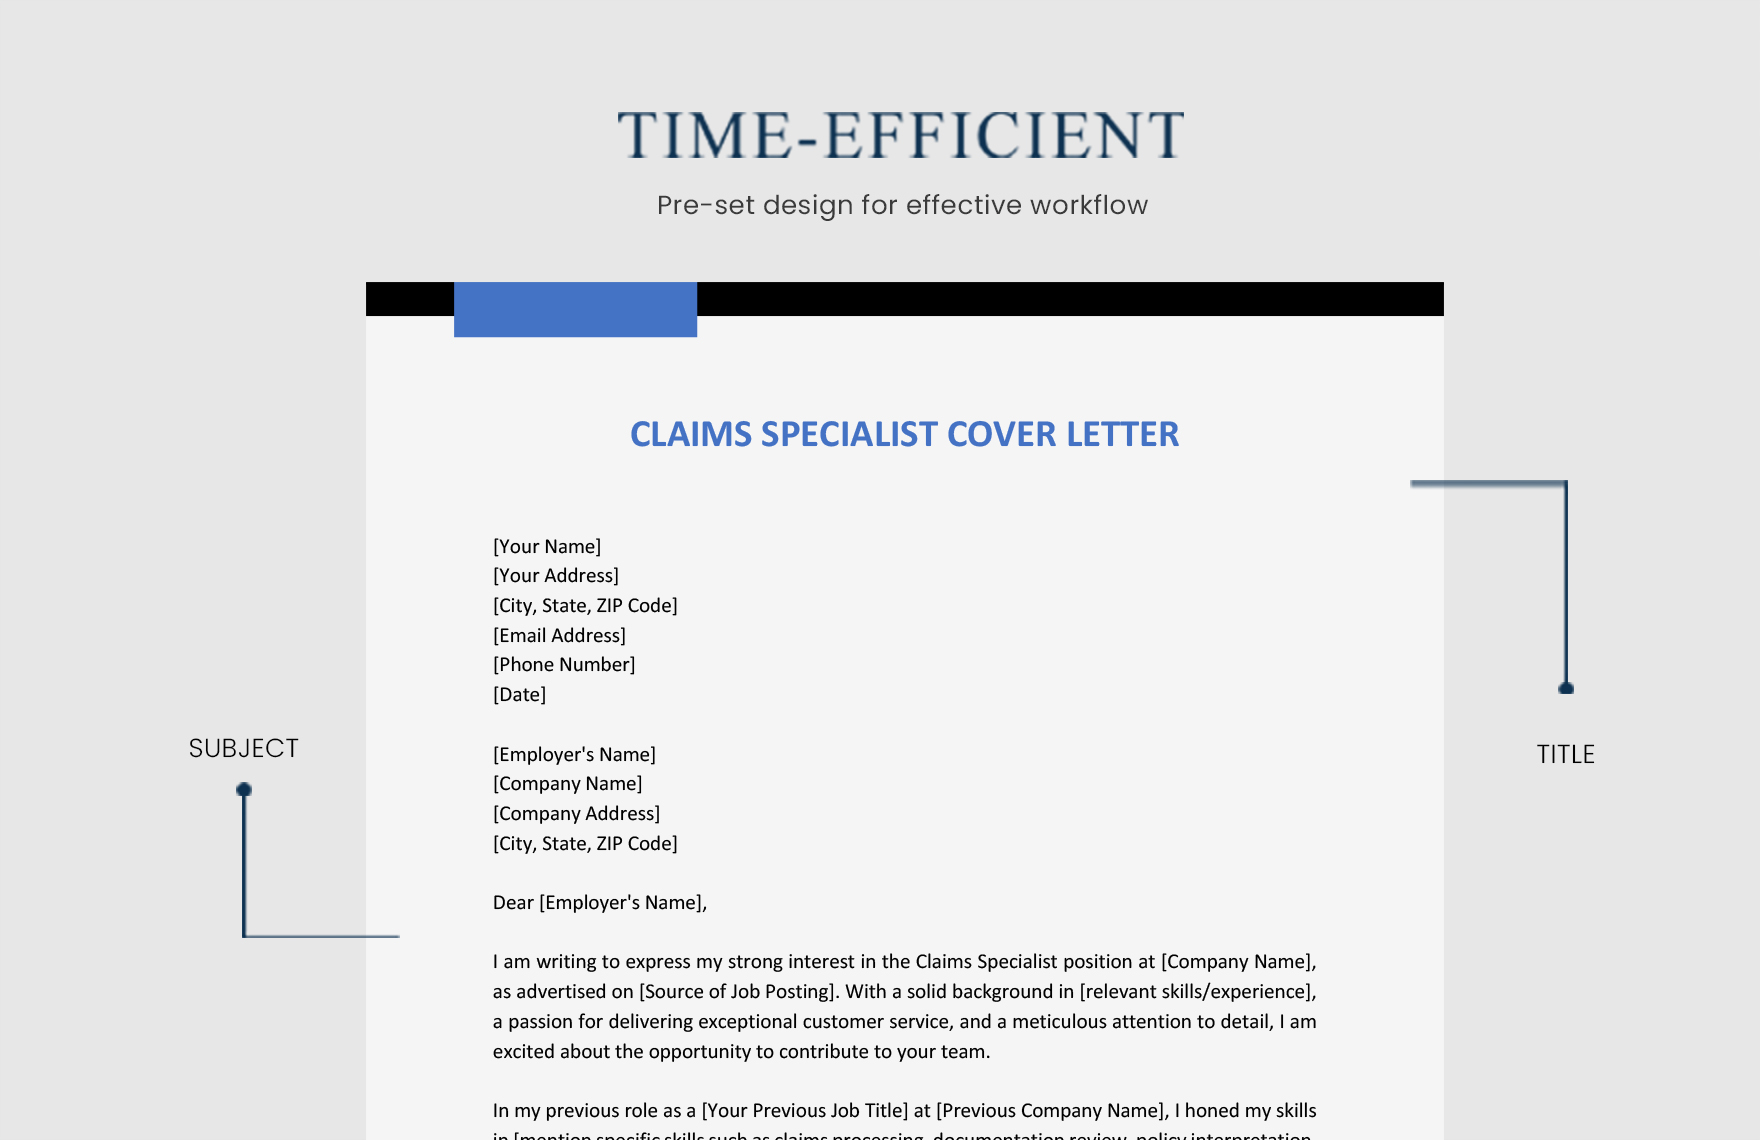 Claims Adjuster Cover Letter